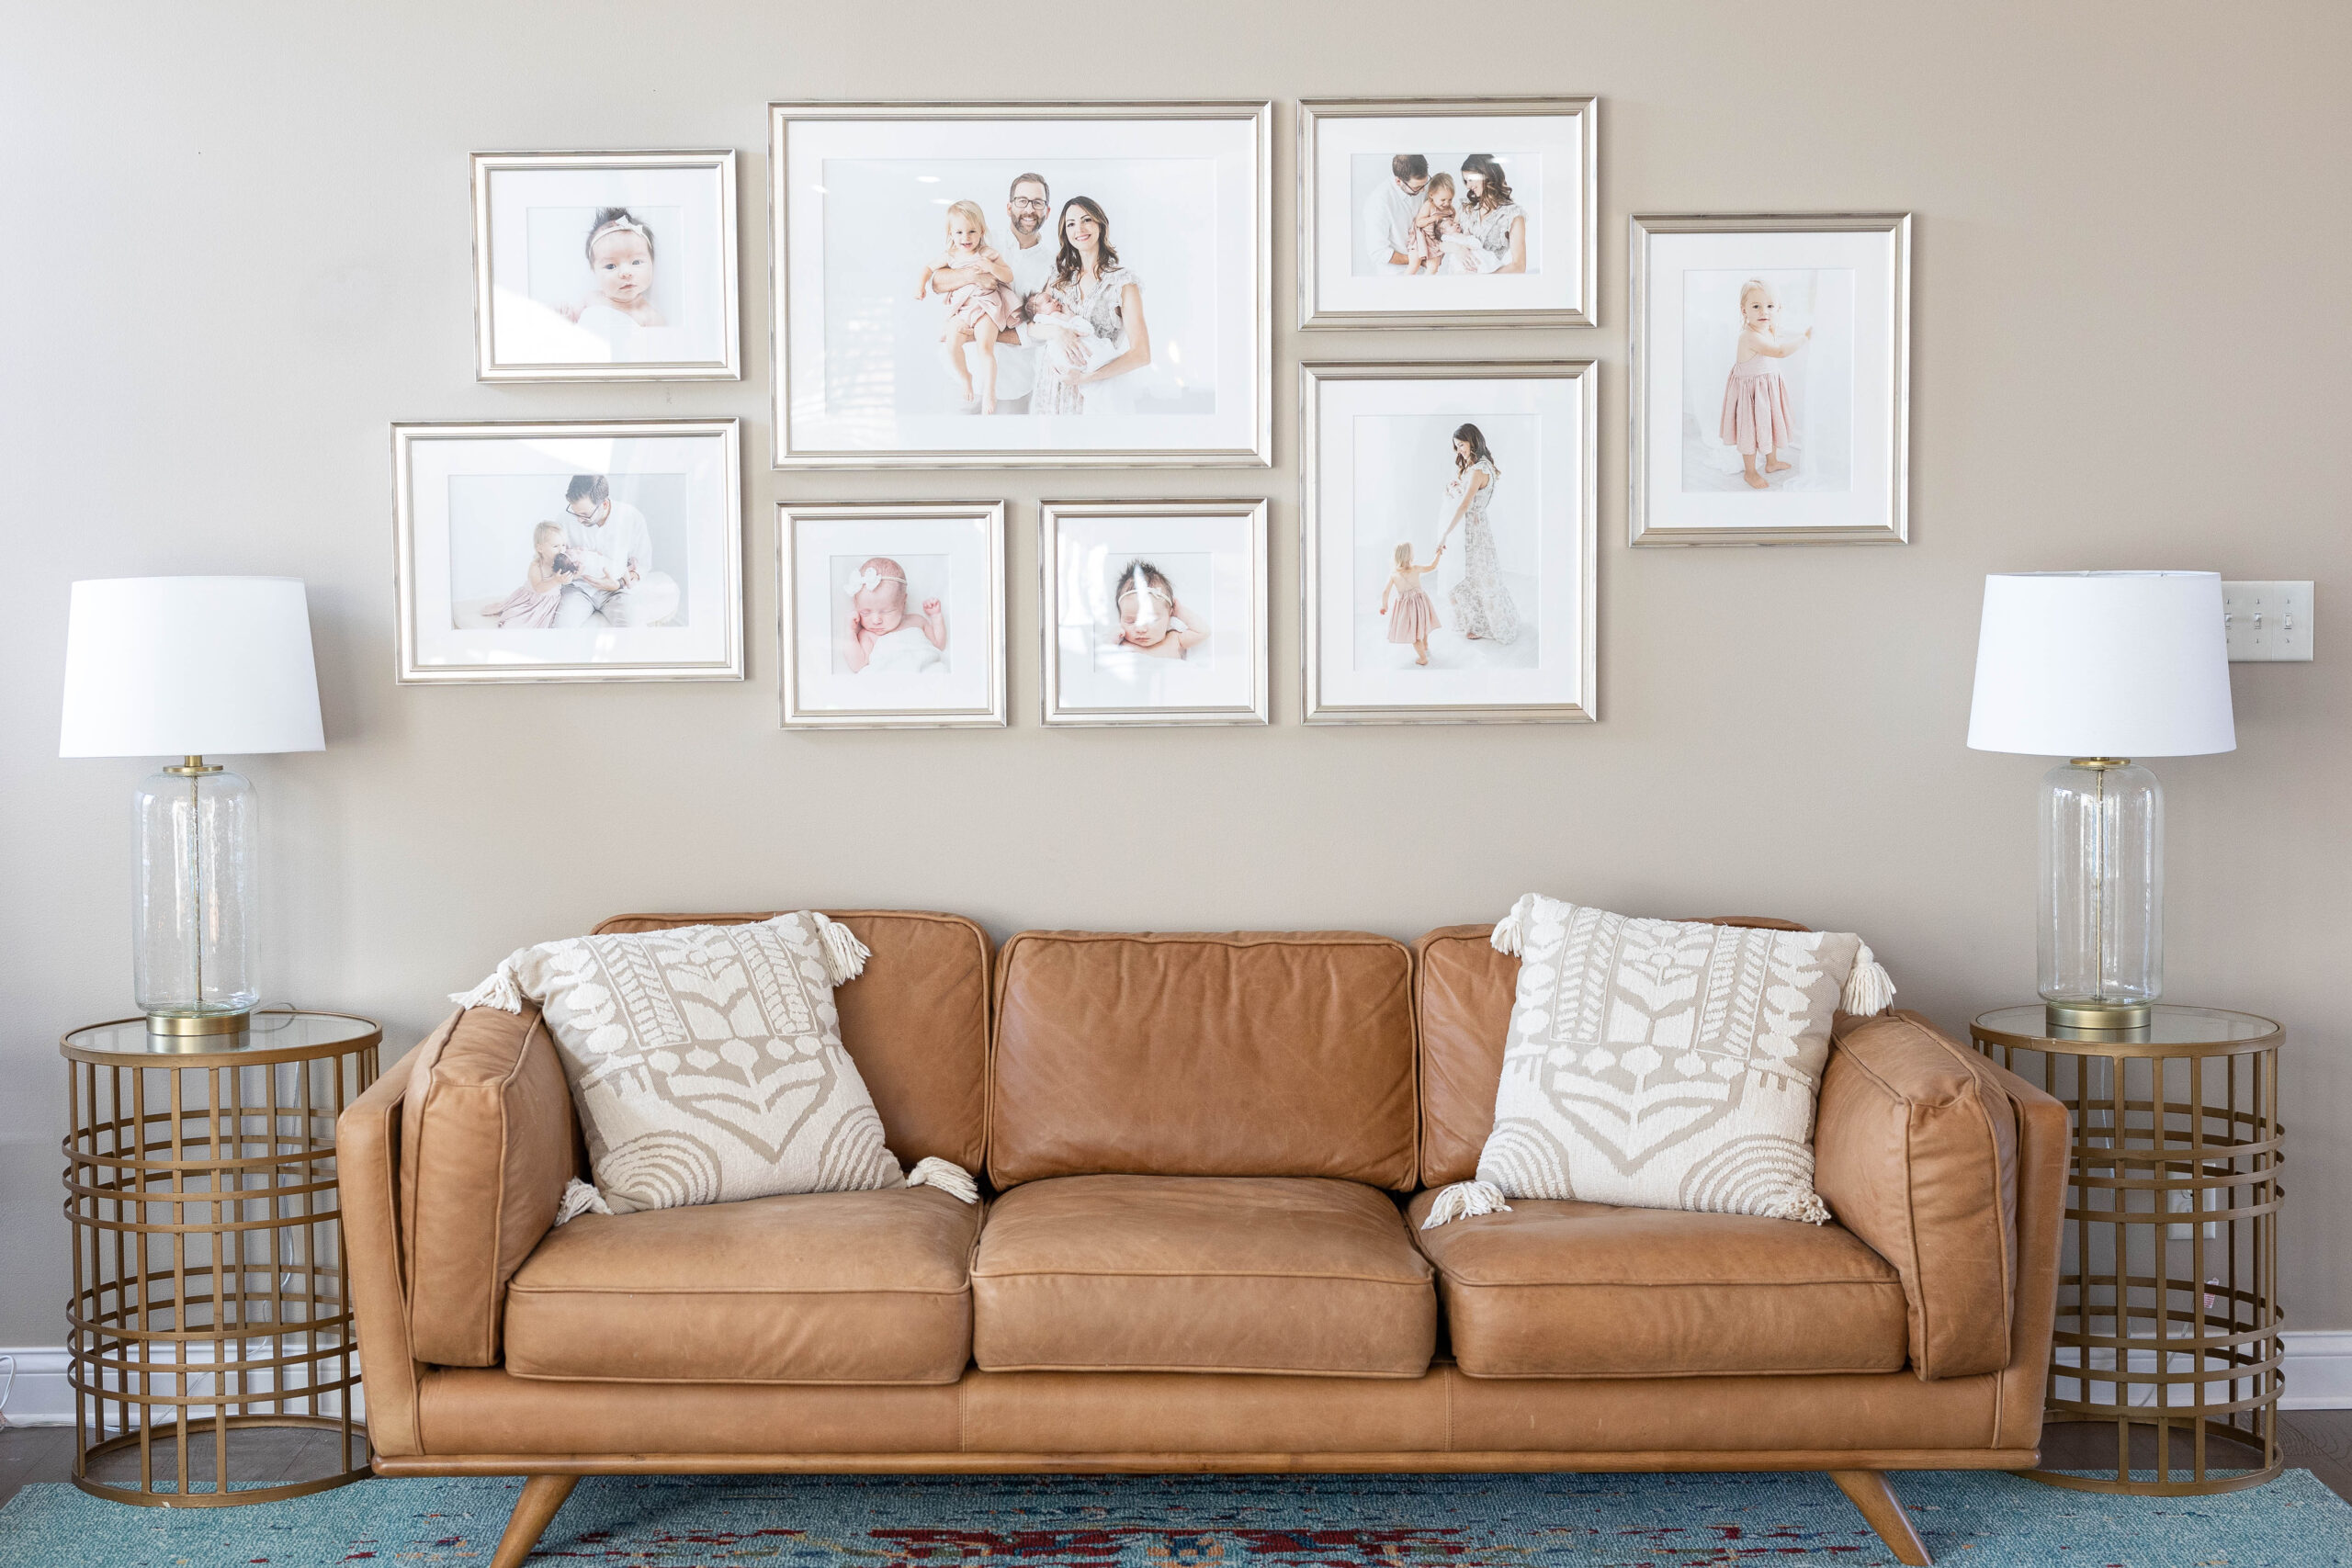 Why display your family photos